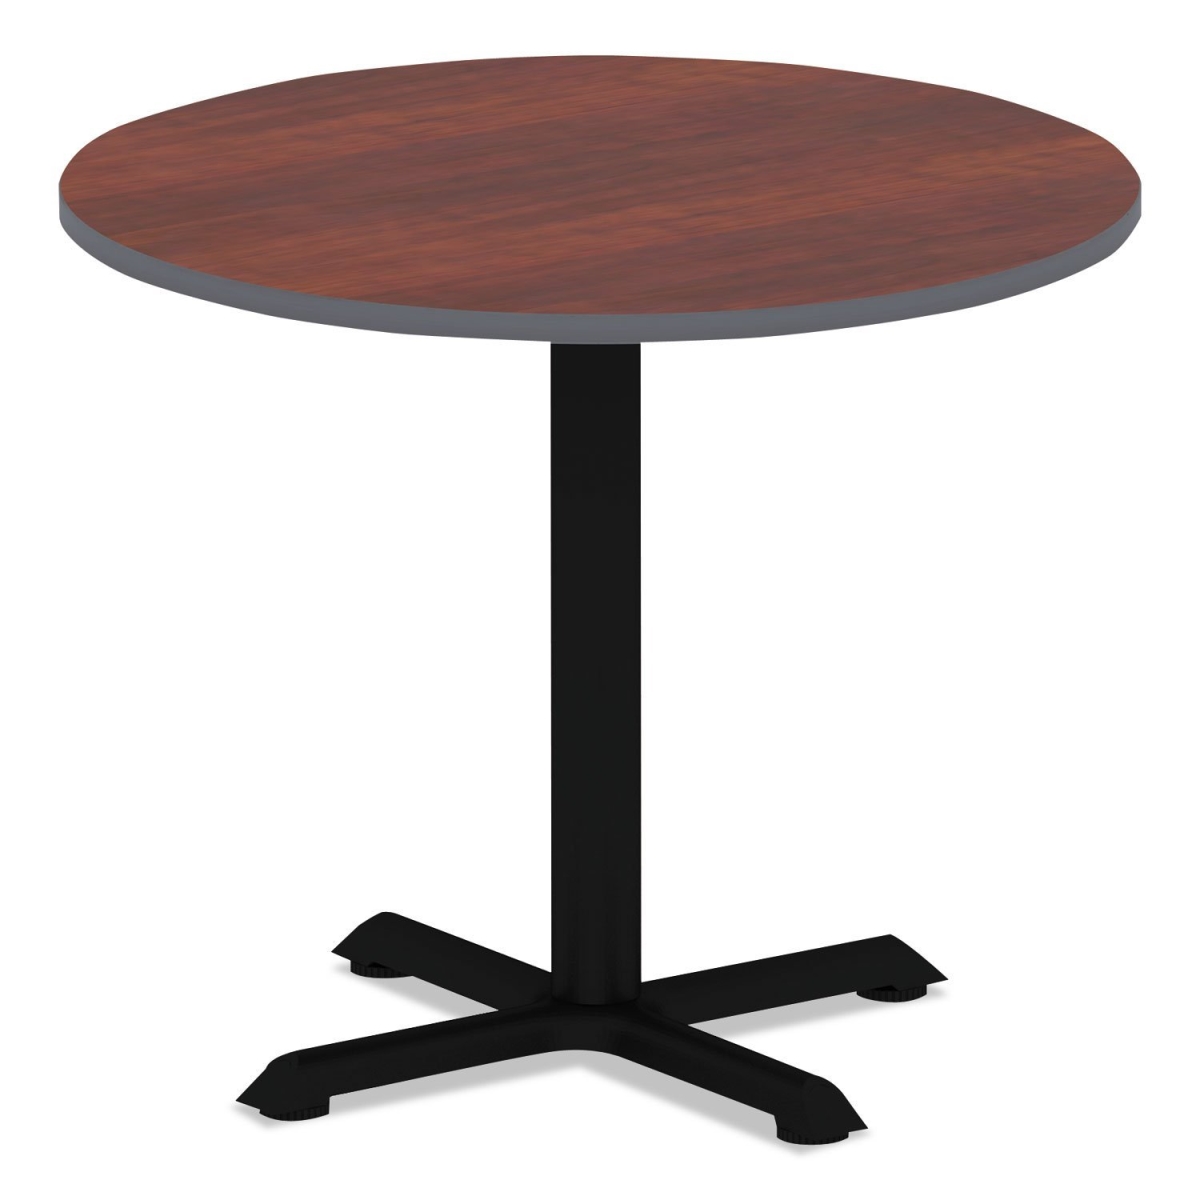 Alera Tbh423b Hospitality Series Single-column Bases Table, 42 In.